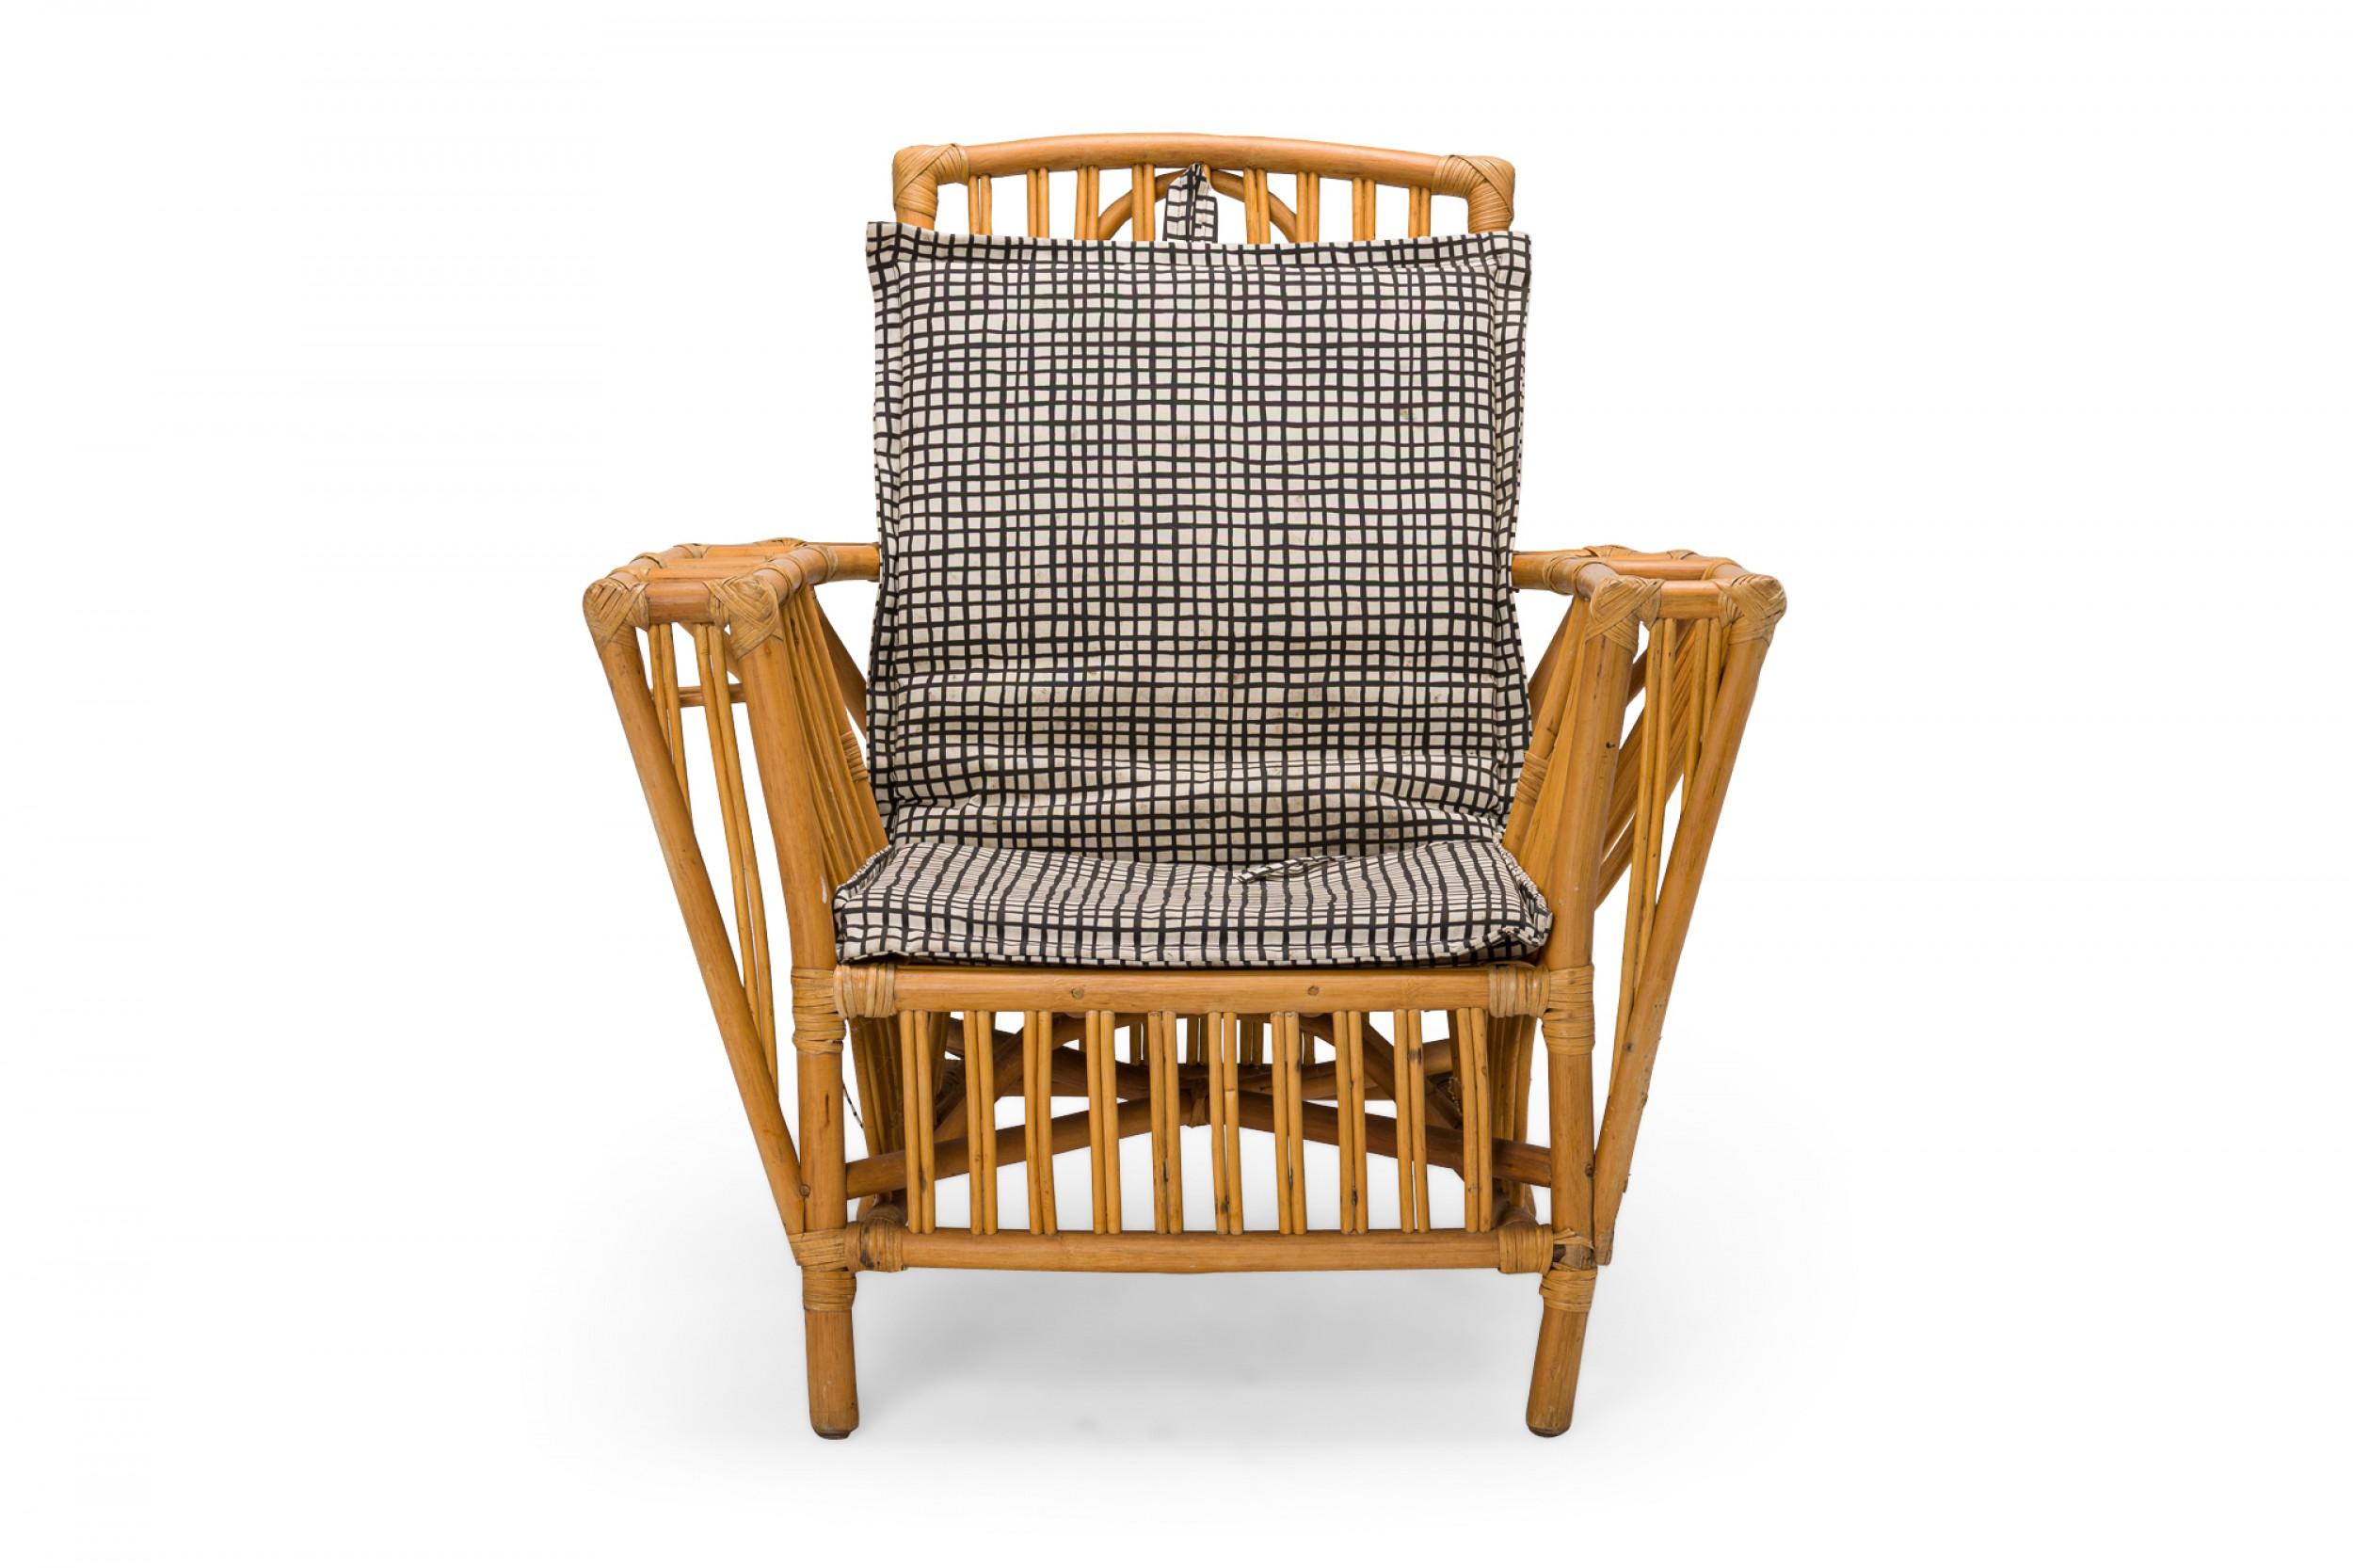 3 mid-centuy light split reed and rattan lounge / armchairs with slightly curved square backs with vertical spindles and arms having built in magazine rack, split reed slat seats, and wicker trim with black and white checkered patterned removable